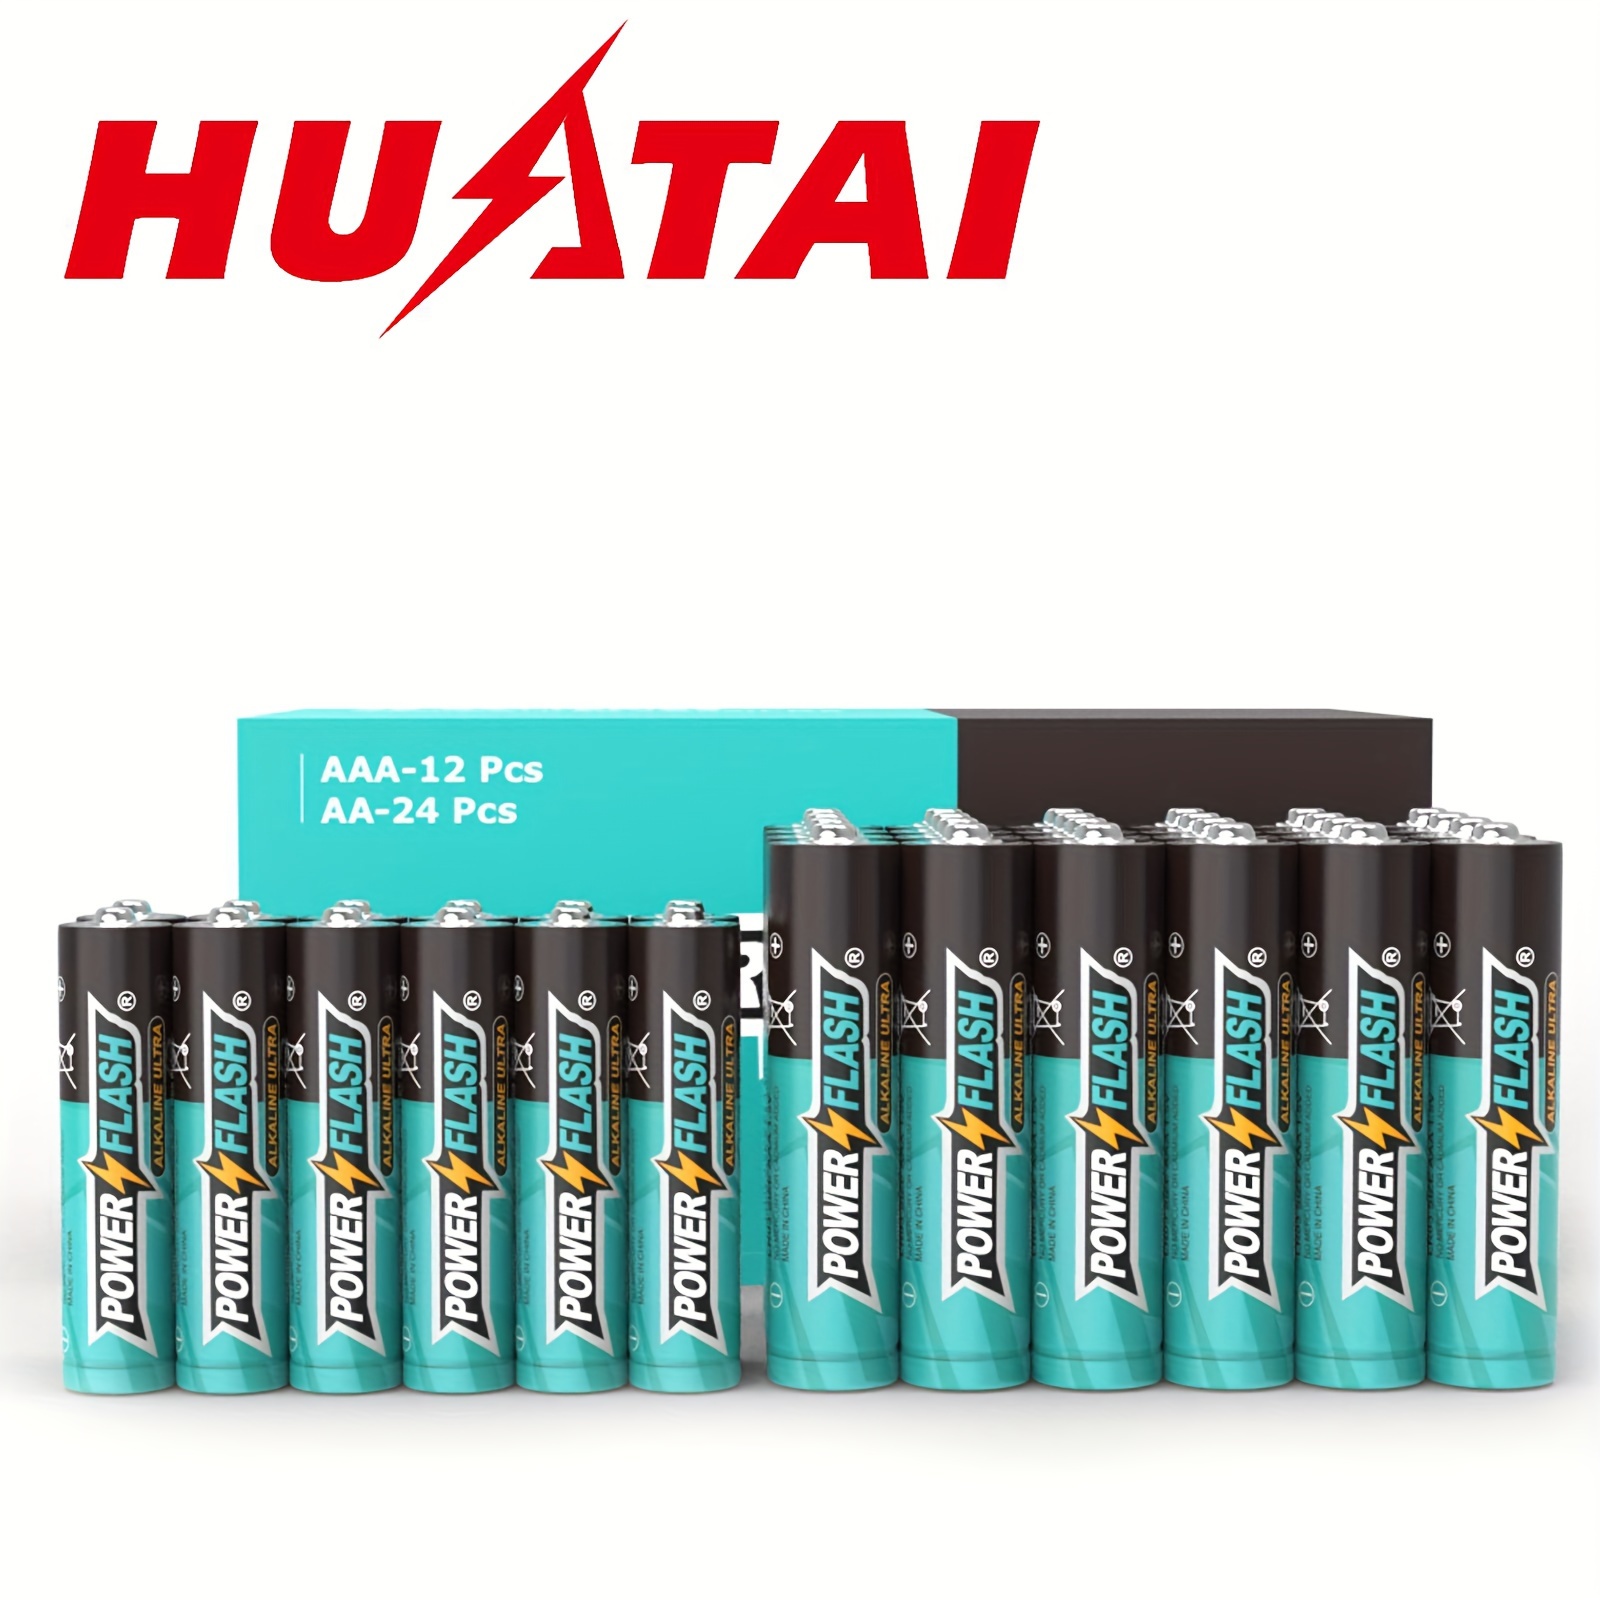 

Huatai Powerflash Alkaline Long-lasting Batteries, Value Pack, Set Of 12 Aaa And 24 Aa Batteries For Various Household Device